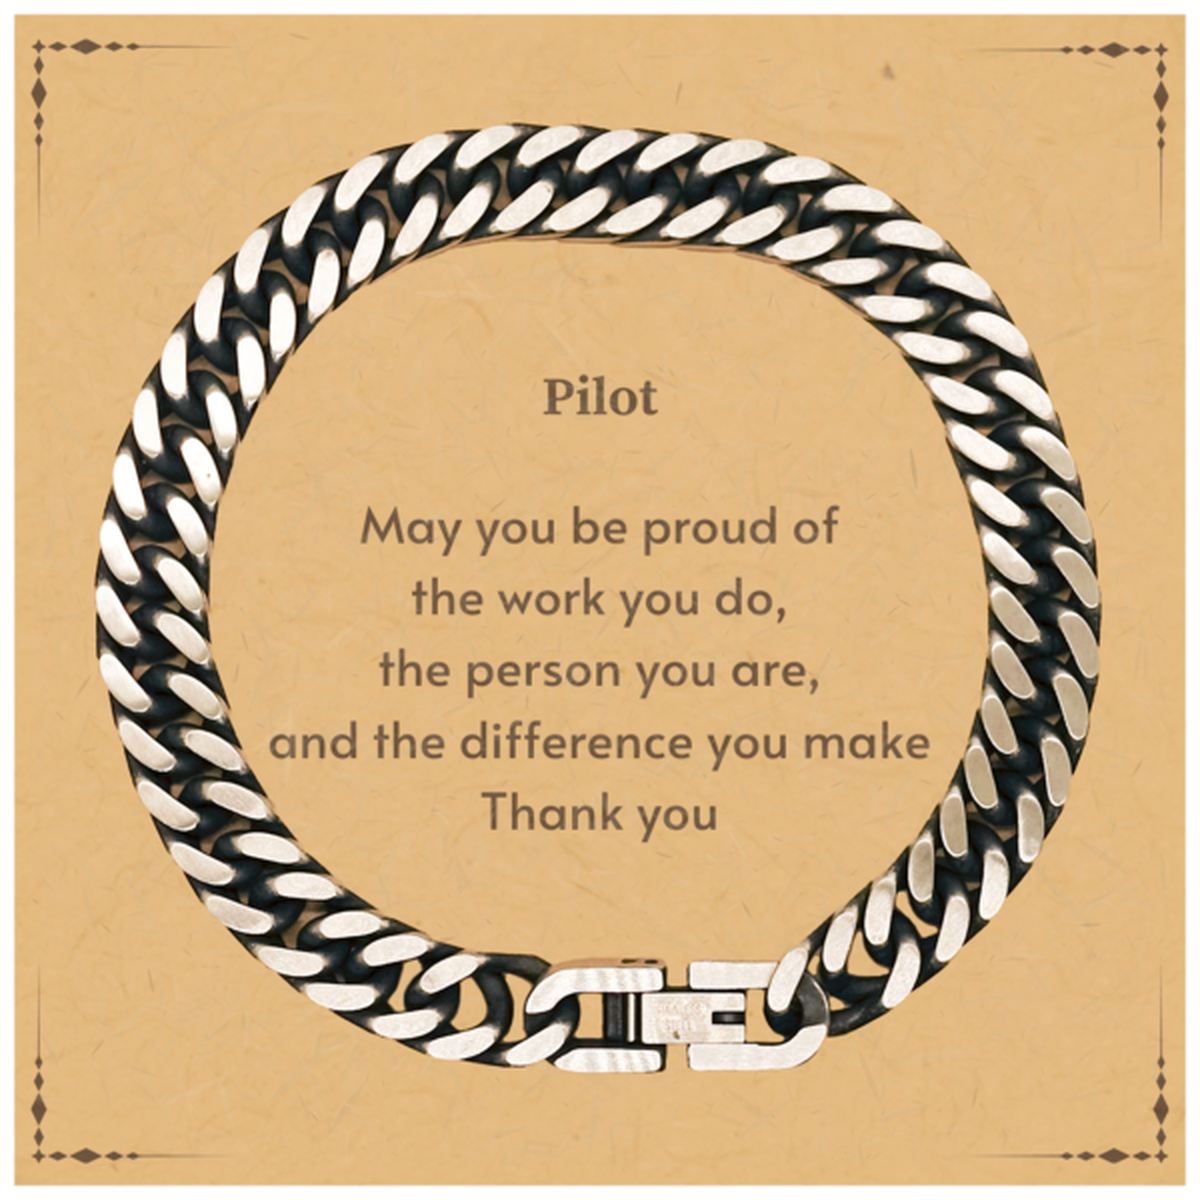 Heartwarming Cuban Link Chain Bracelet Retirement Coworkers Gifts for Pilot, Pilot May You be proud of the work you do, the person you are Gifts for Boss Men Women Friends